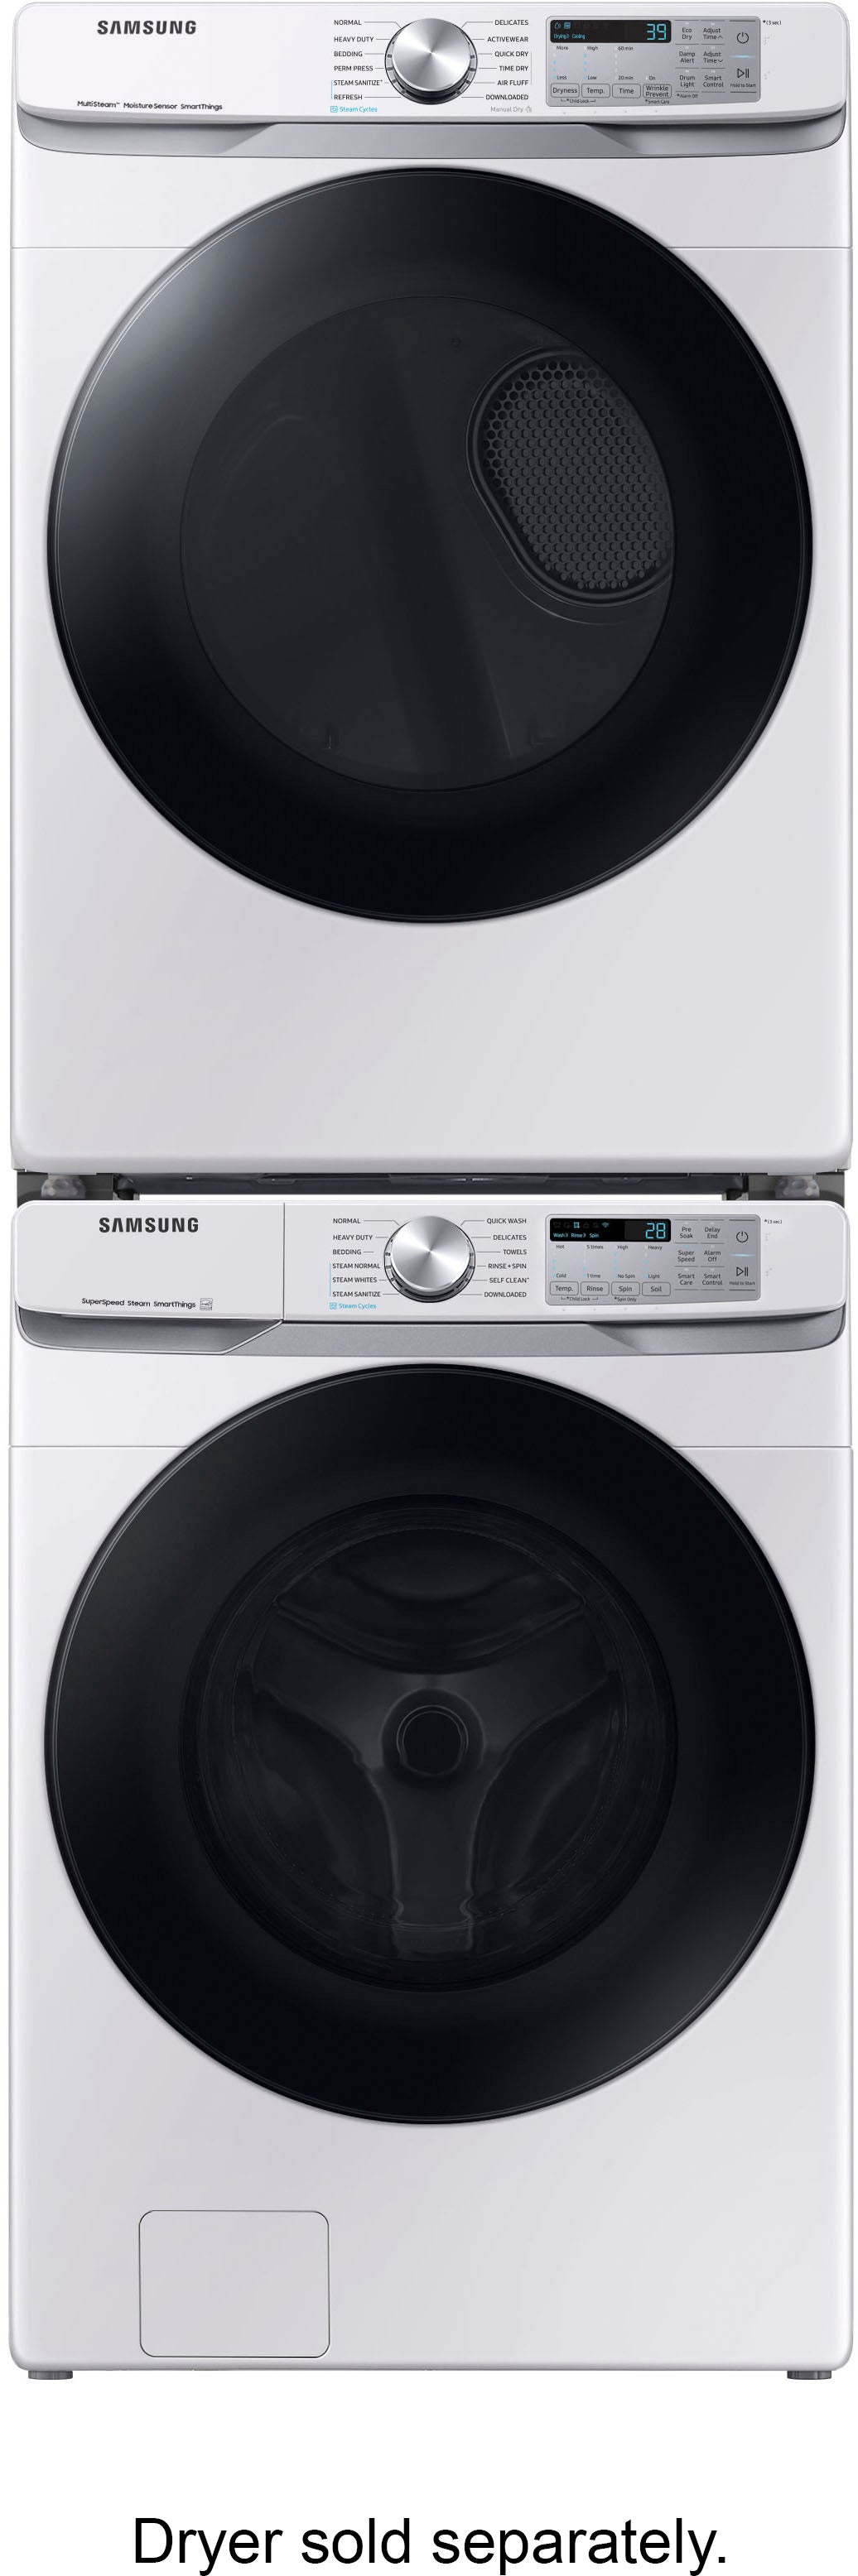 Samsung - 4.5 cu. ft. Large Capacity Smart Front Load Washer with Super Speed Wash - White_2